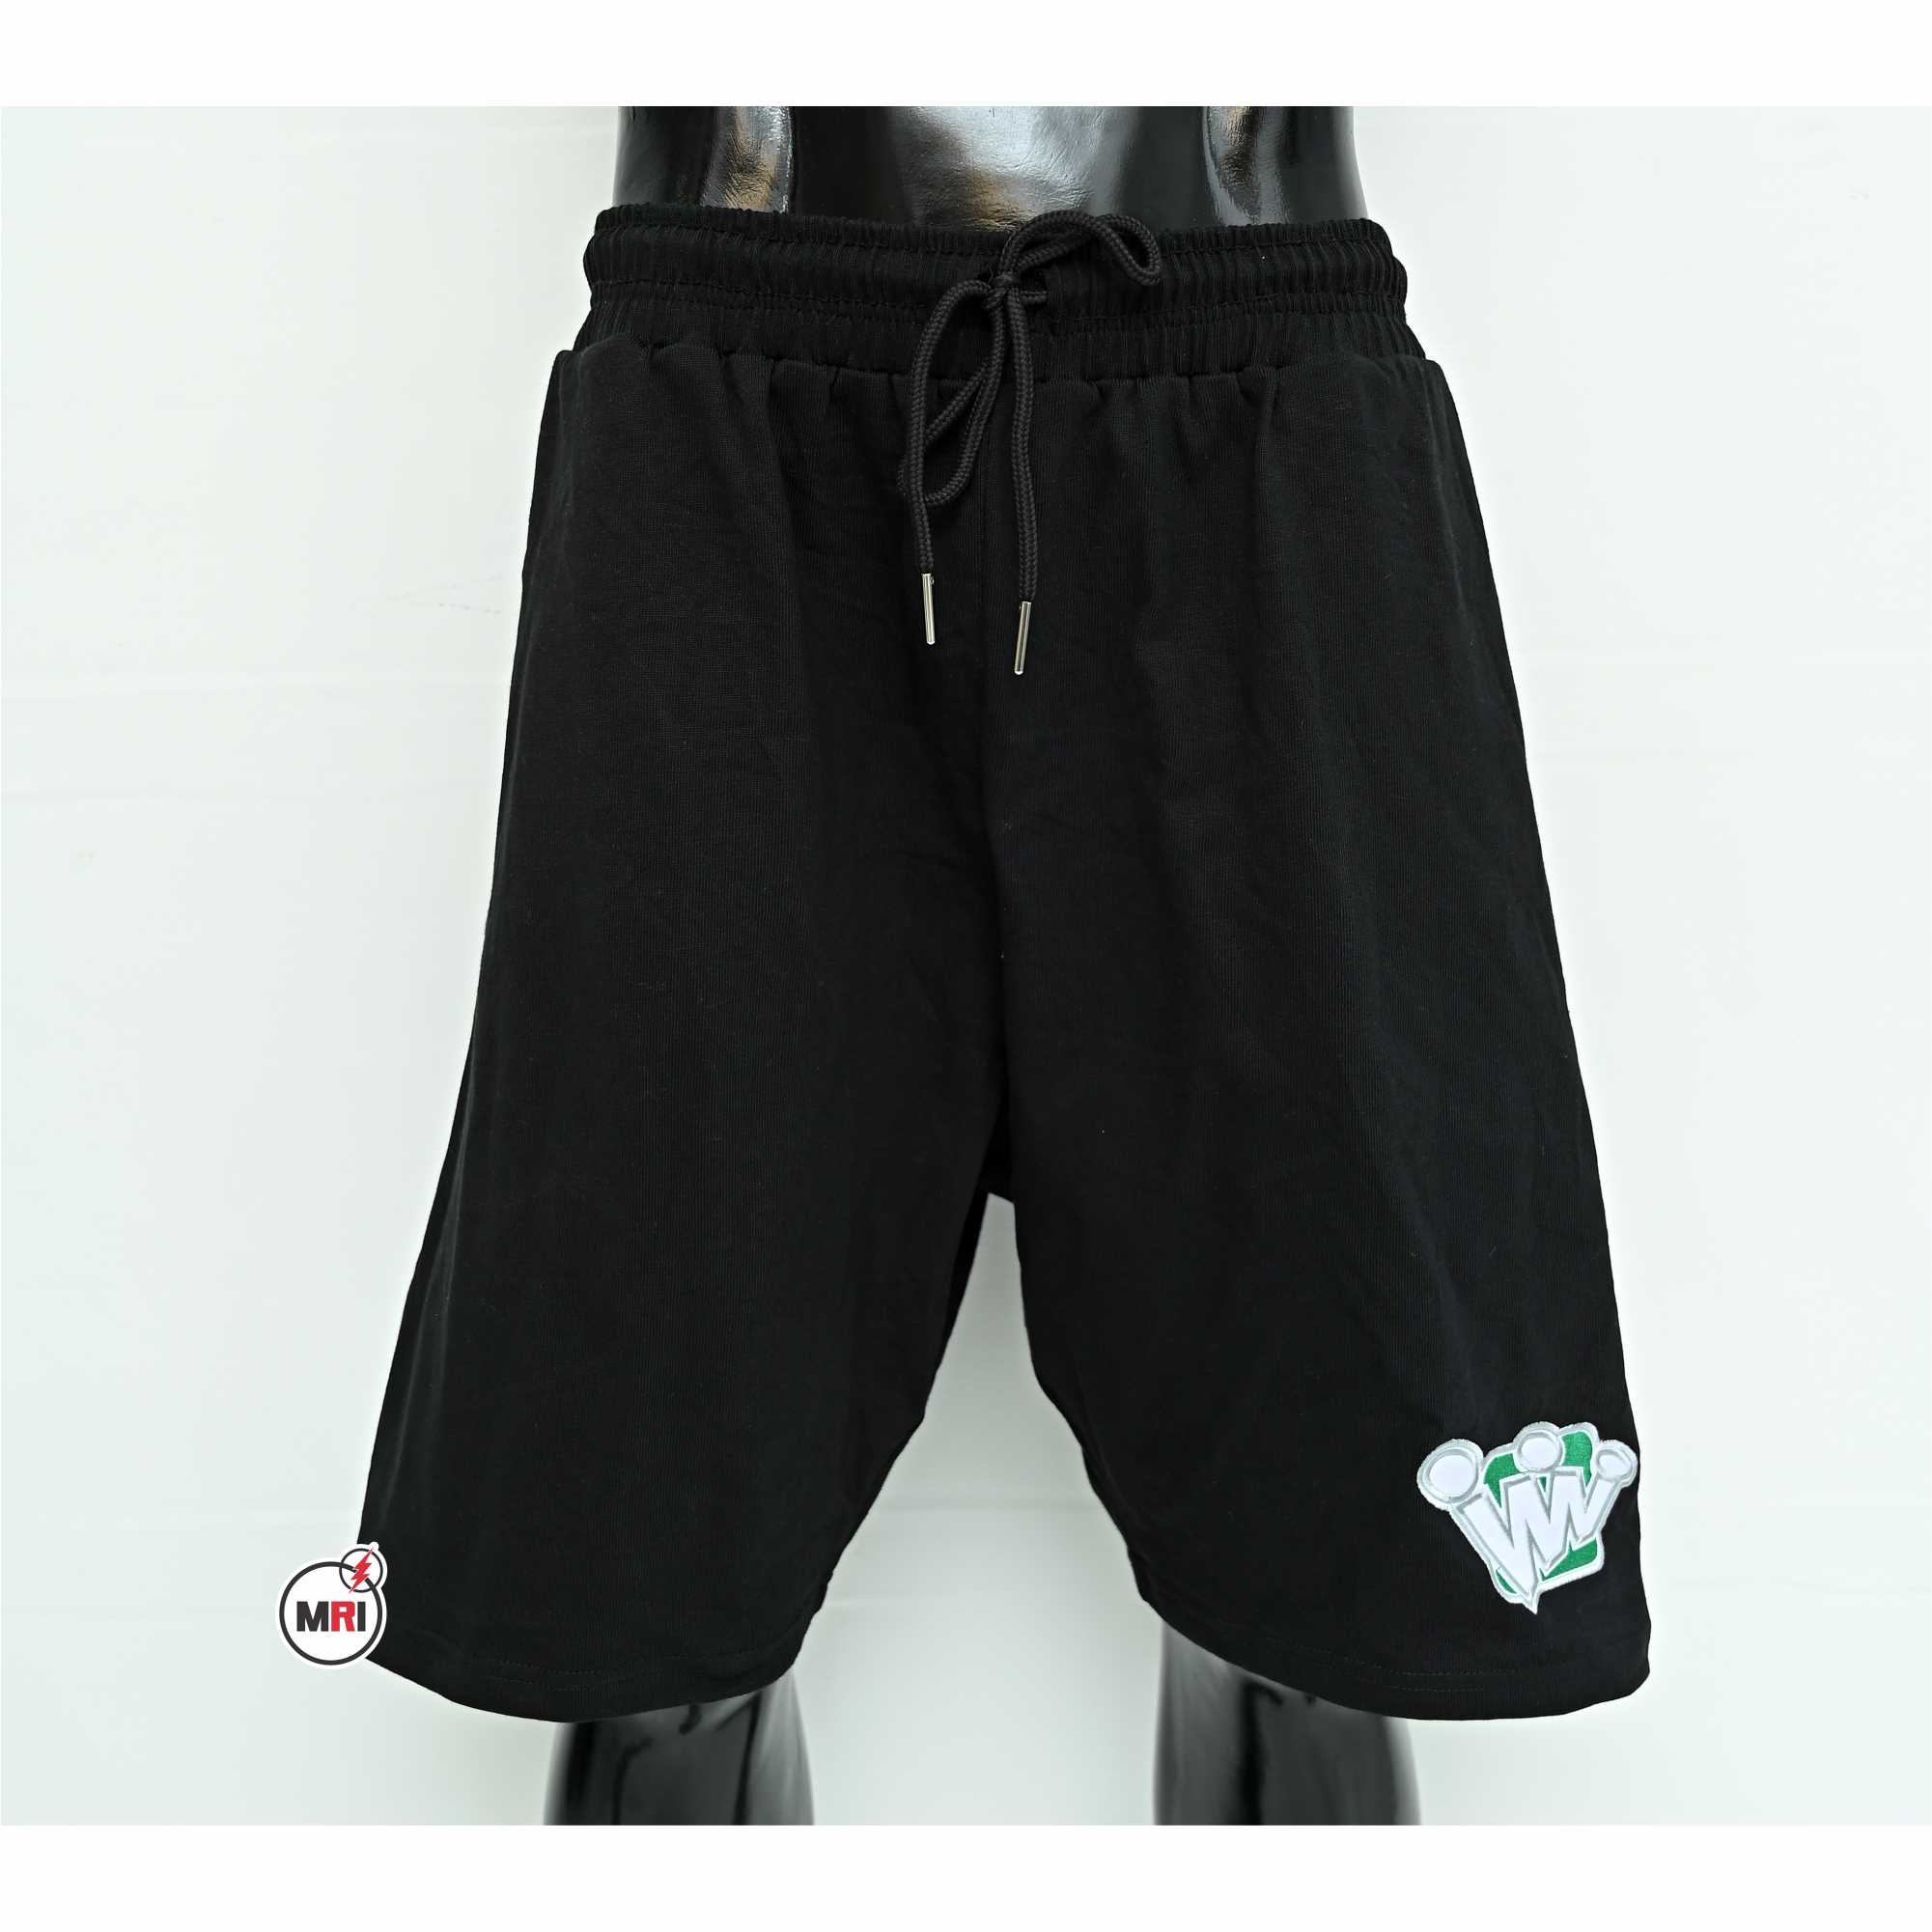 Customized Applique Embroidery Men’s Shorts